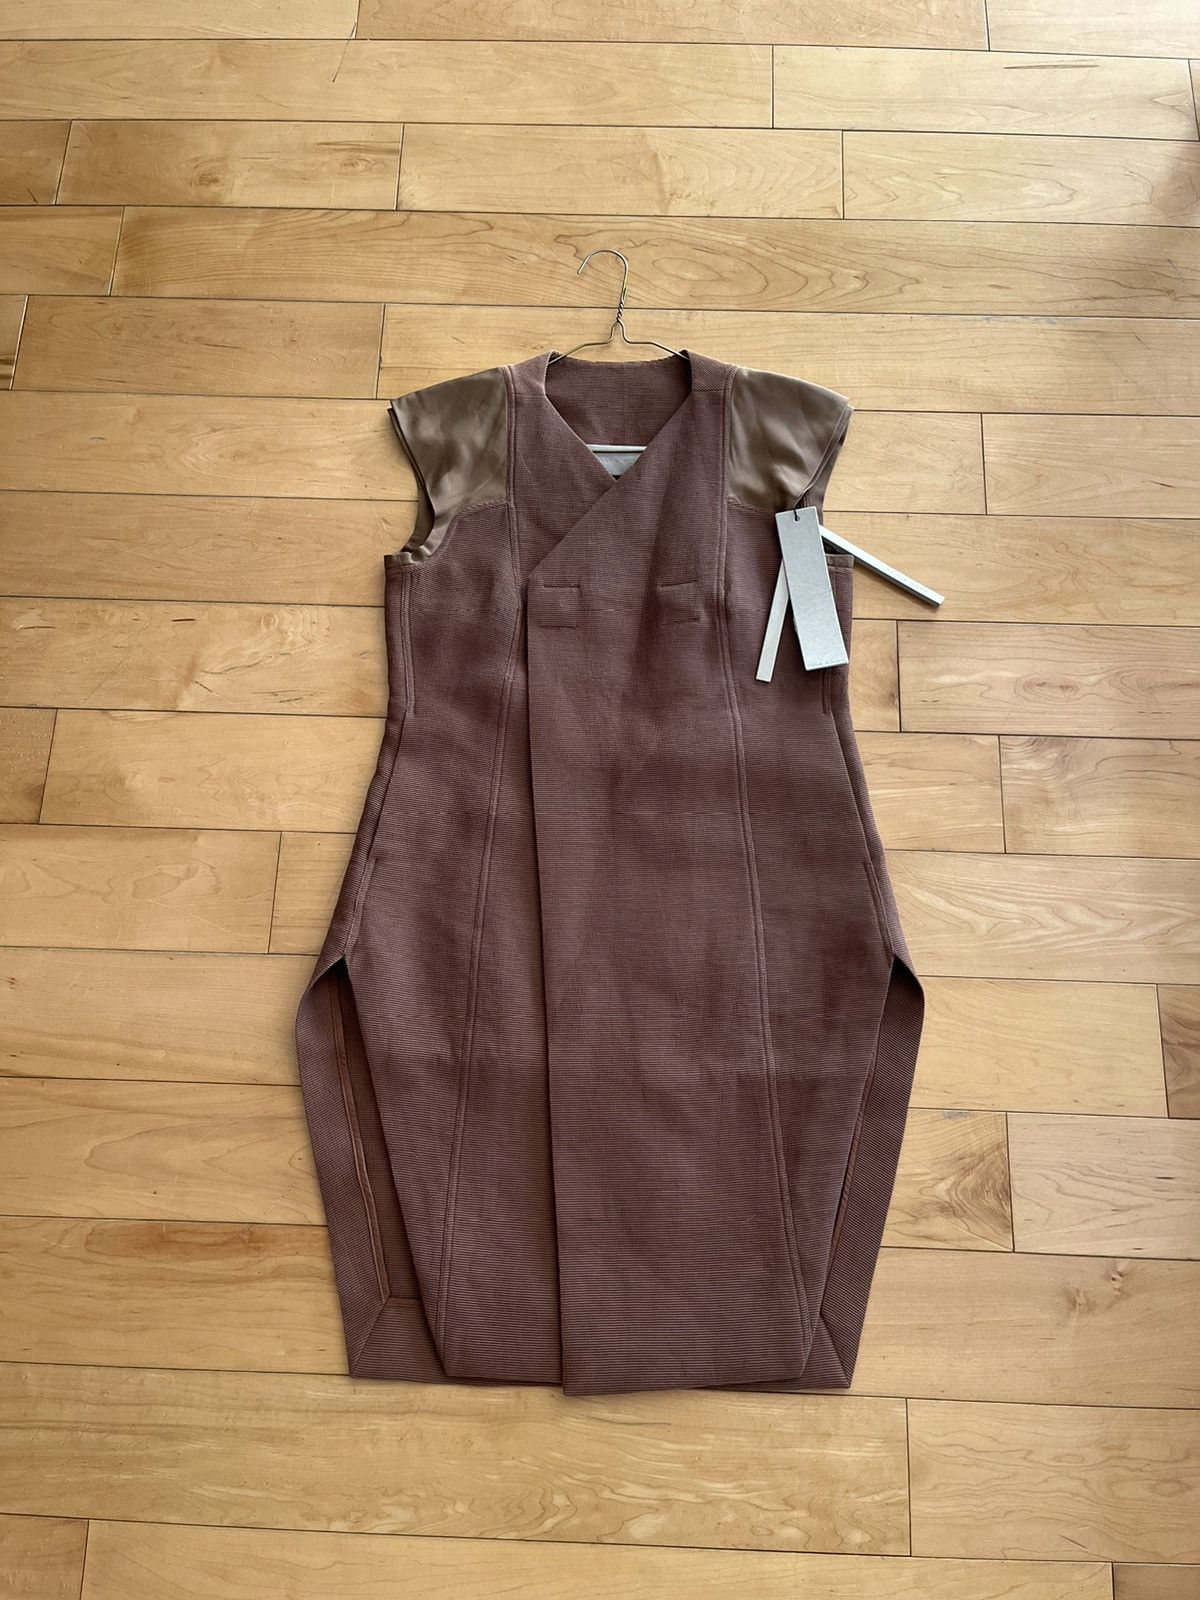 NWT - Rick Owens SS15 Sienna Duster Vest - 1